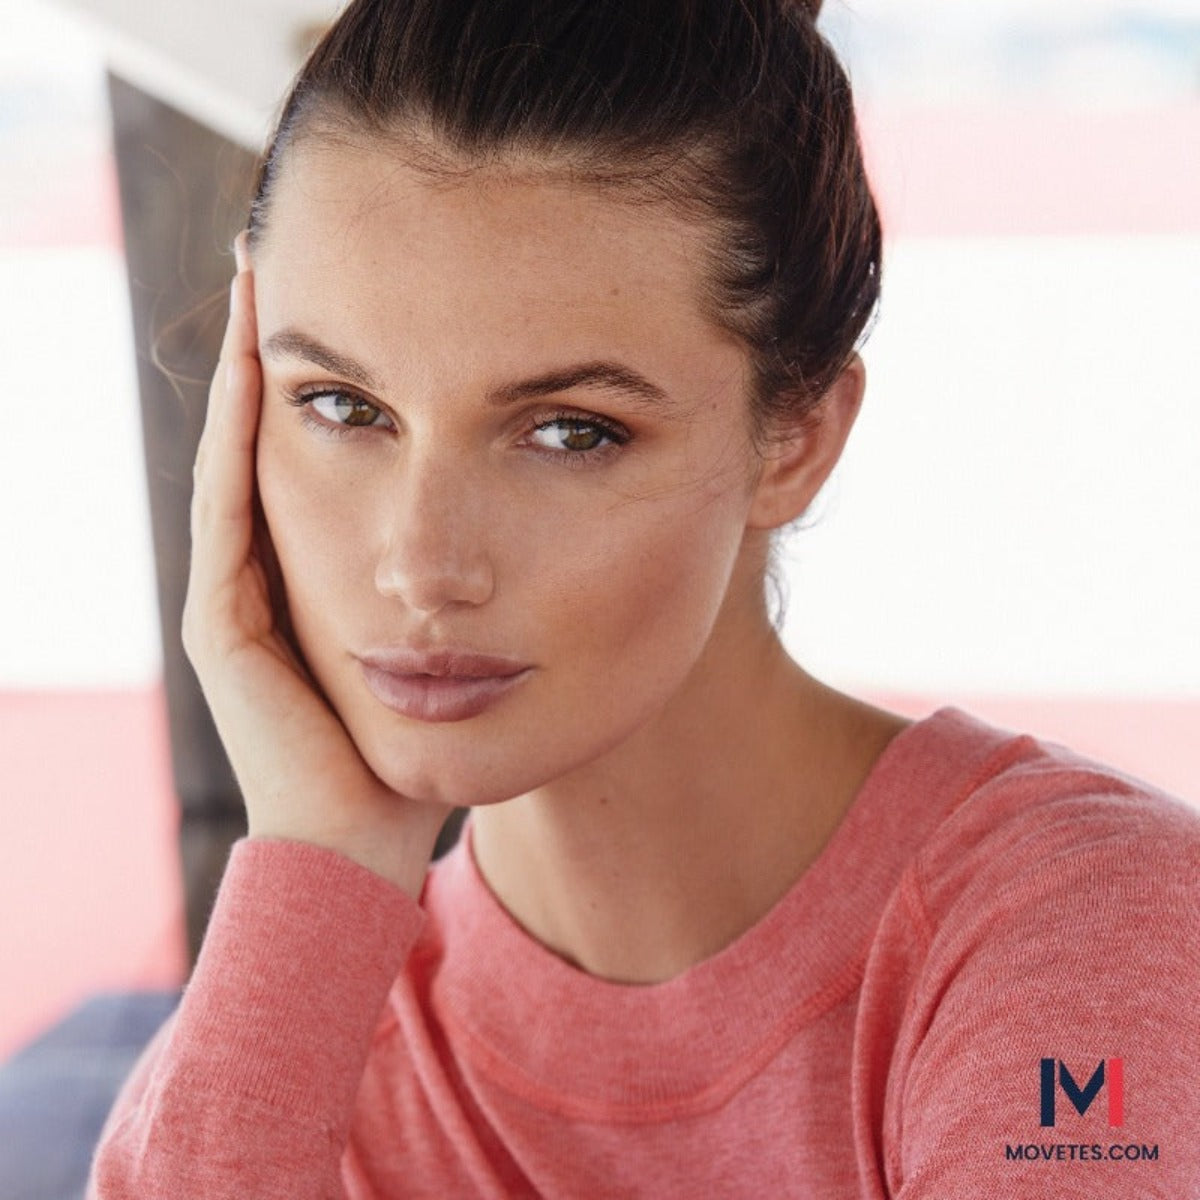 This image depicts a woman in an up-close image wearing the pastel red organic Restore Cotton Crewneck and her hair perfectly coiffed in a relaxed updo